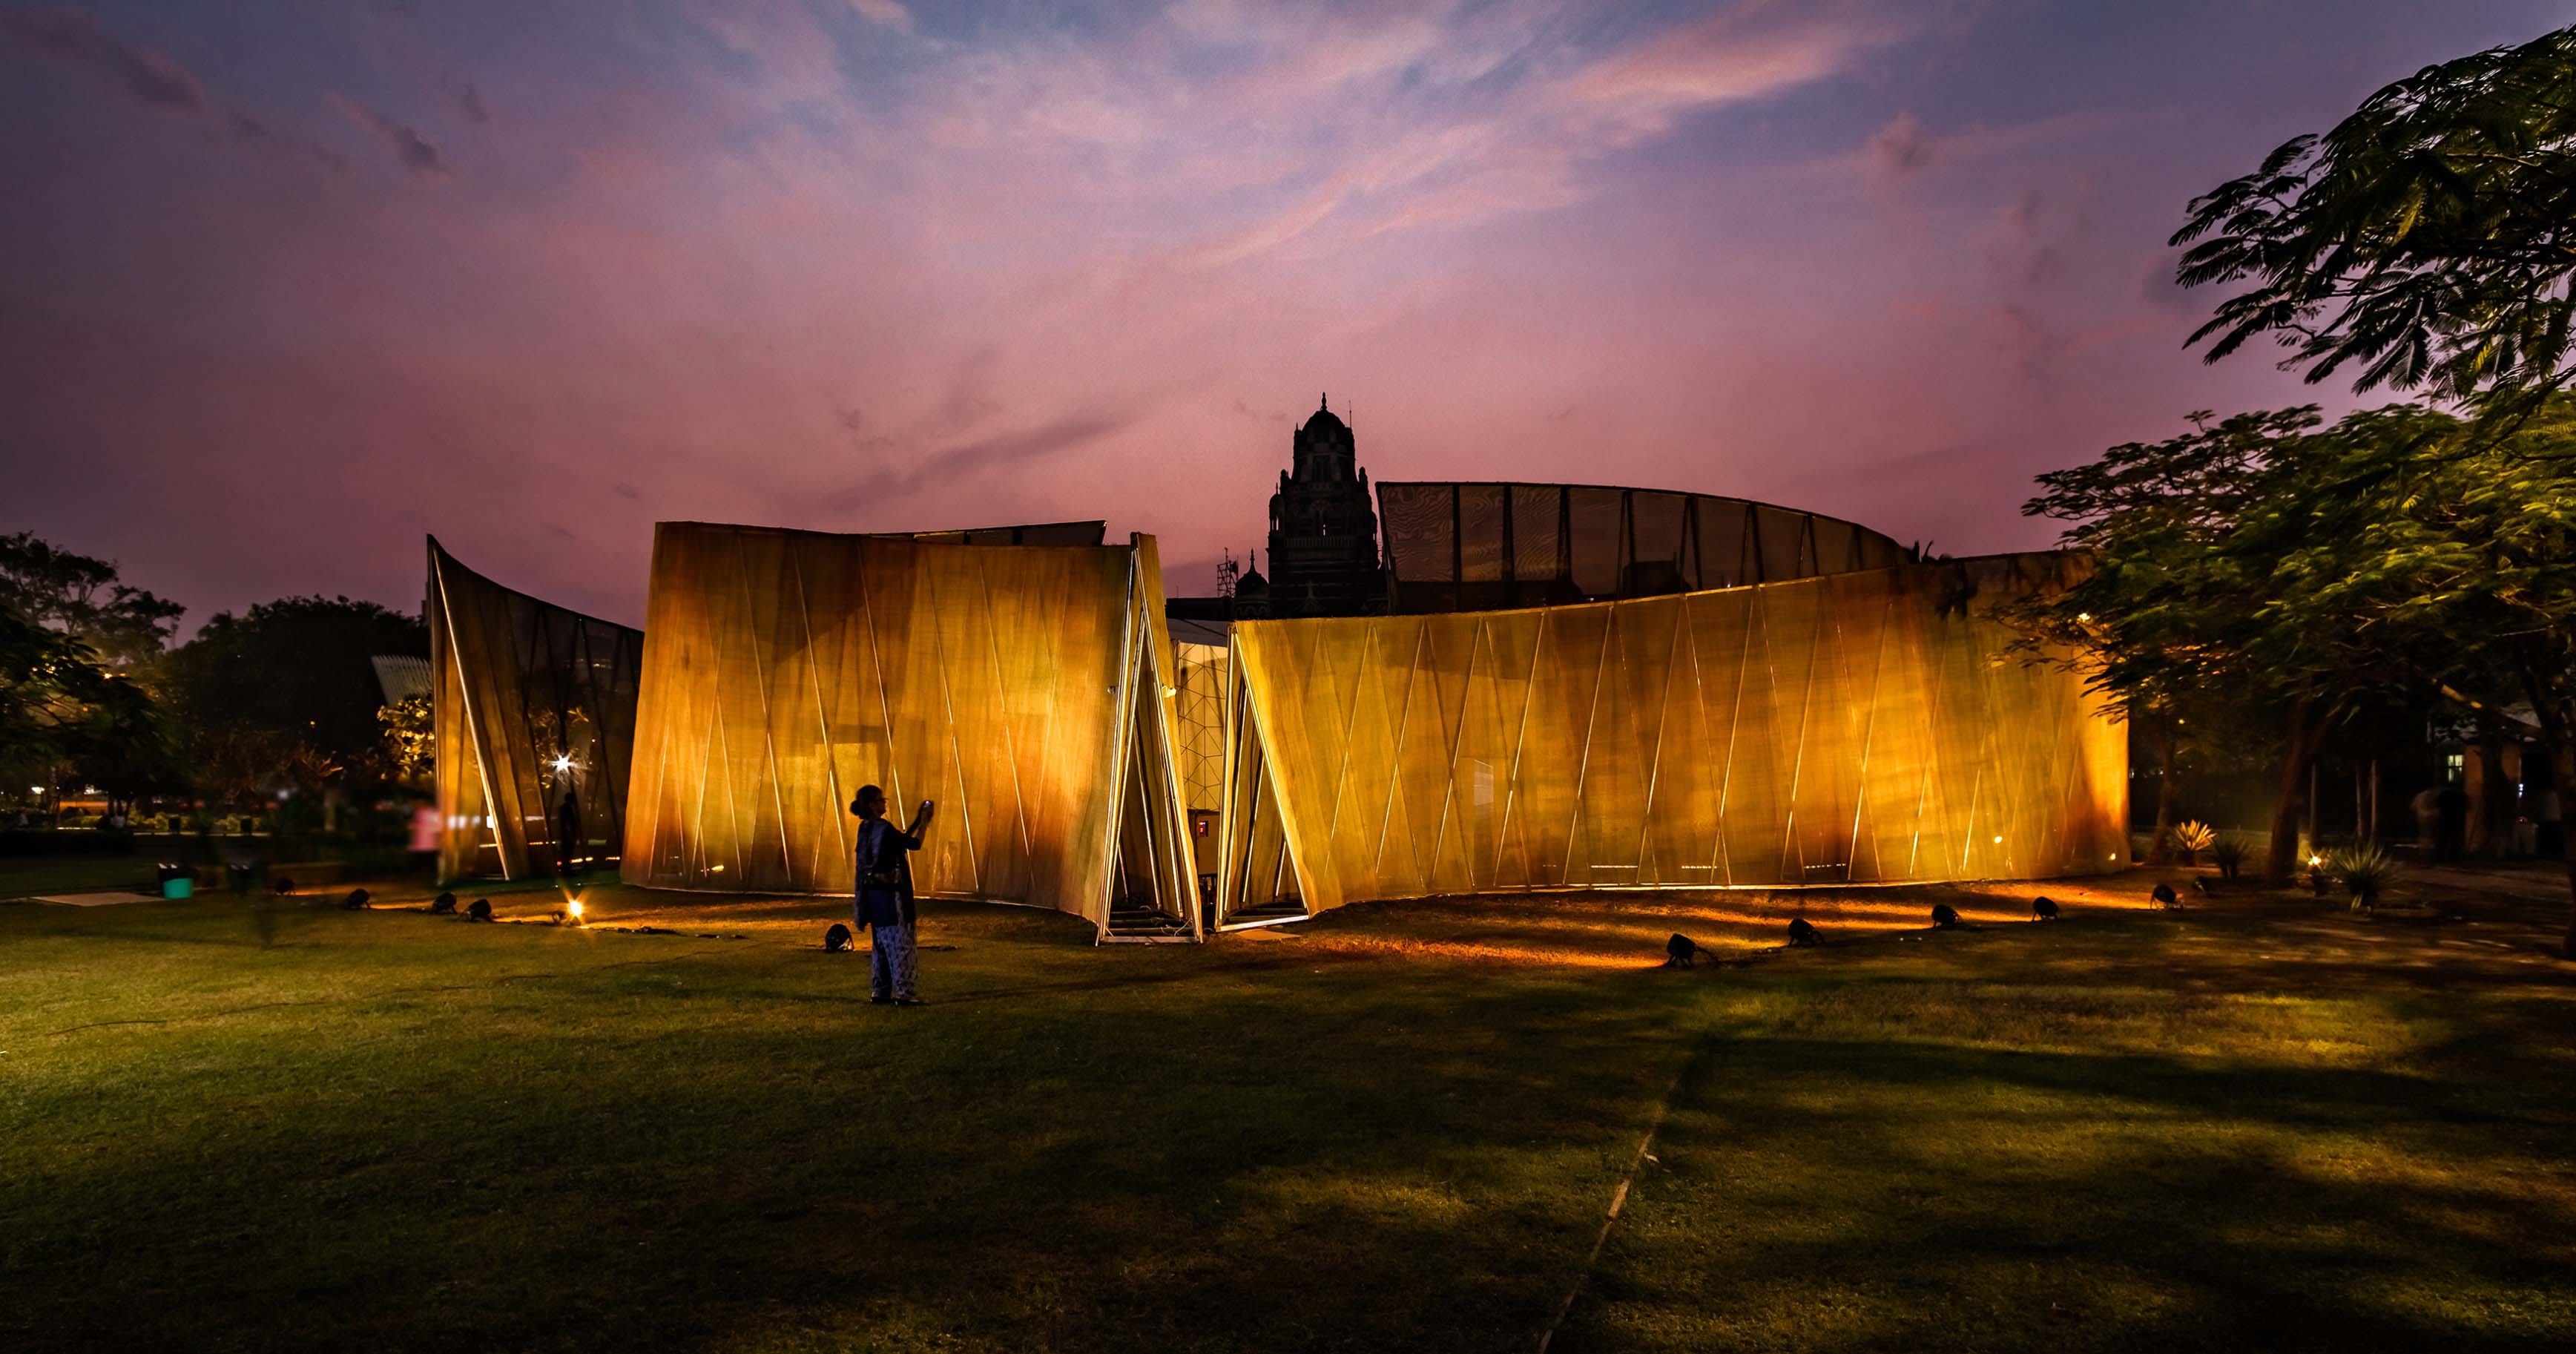 The Bonjour India Experience at New Delhi by SpaceMatters